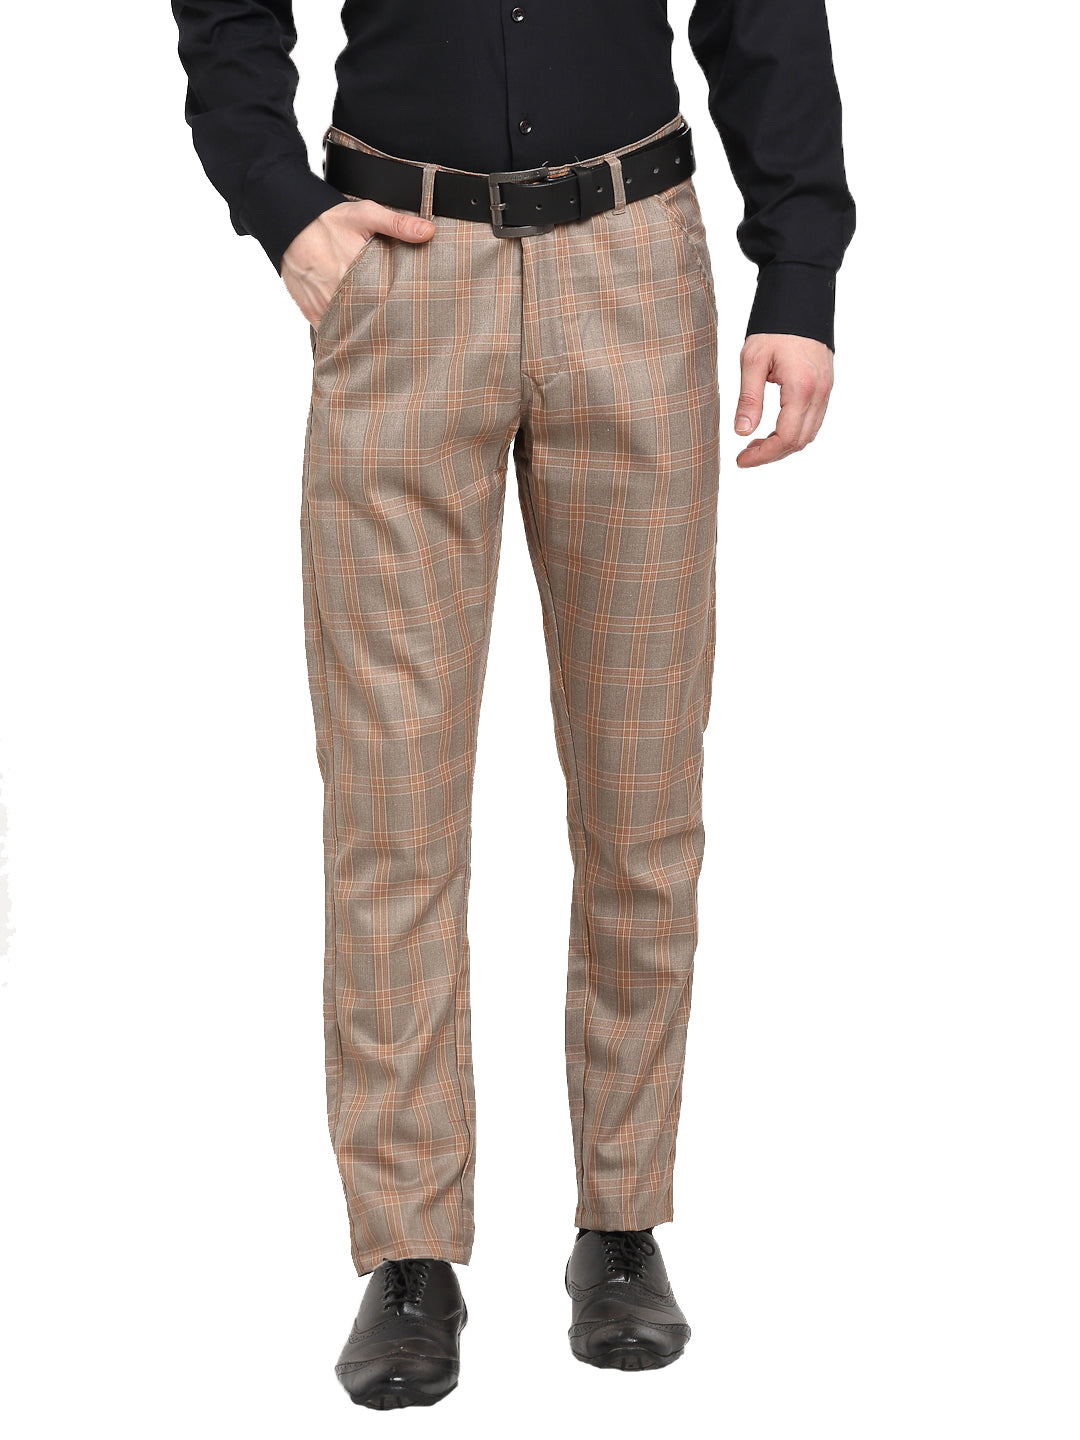 Mens Checker Slim Fit Plaid Checkered Pants Stretch Casual Work Pants  Trousers | eBay